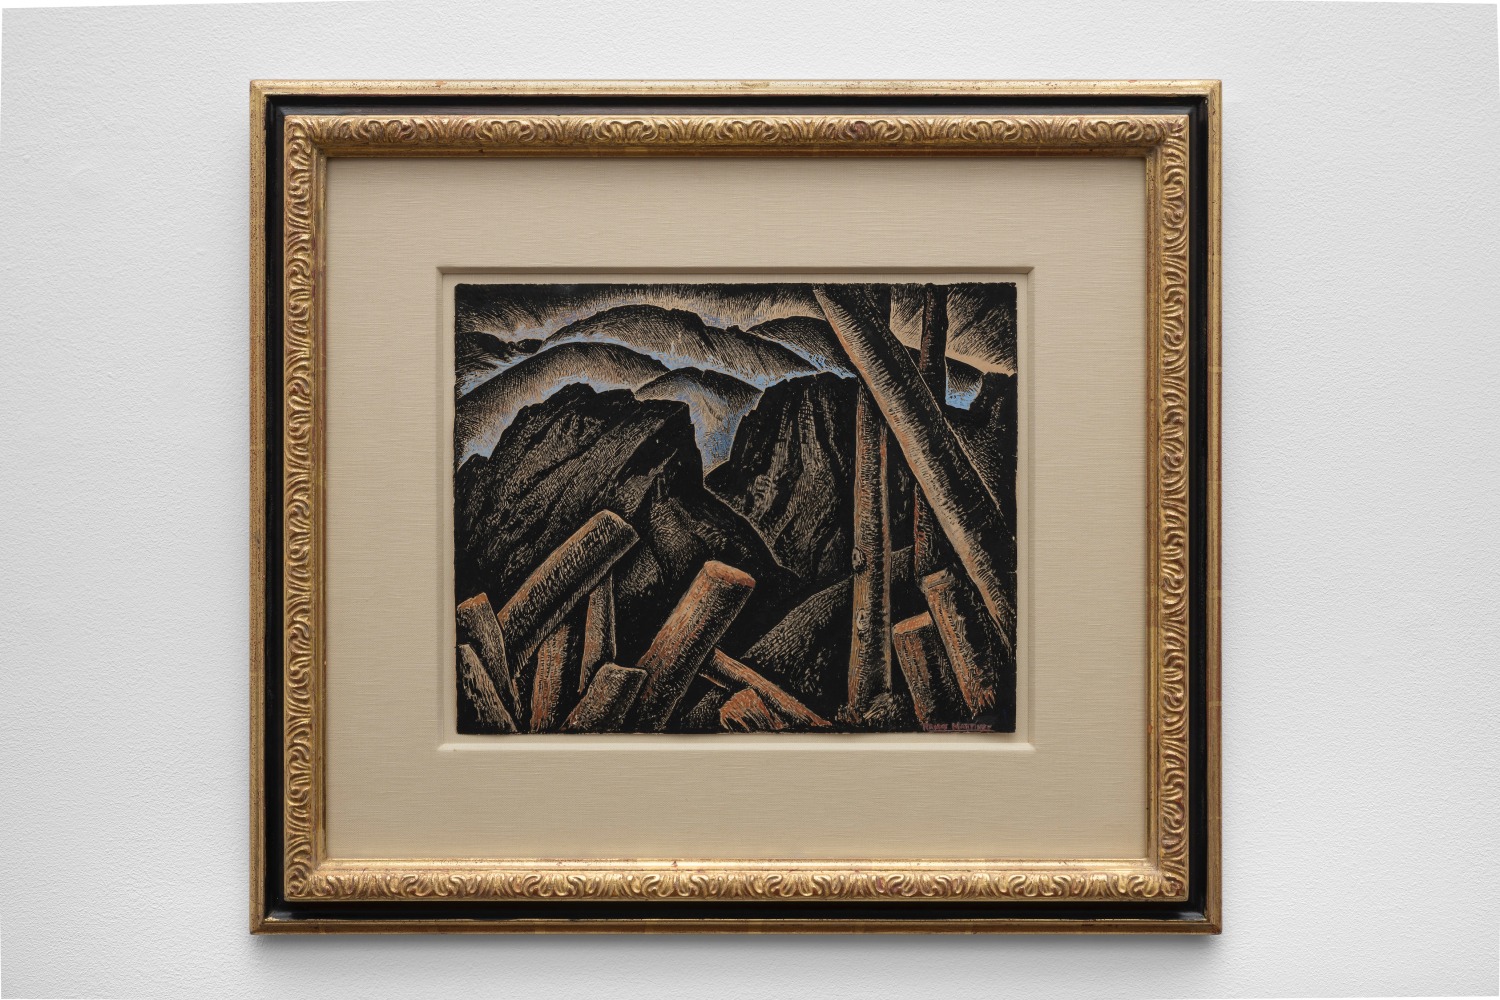 Alfredo Ramos Martínez (1871-1946) After the Storm, circa 1934     tempera on paper 11 1/2 x 14 5/8 inches;  29.2 x 37.1 centimeters LSFA# 13360